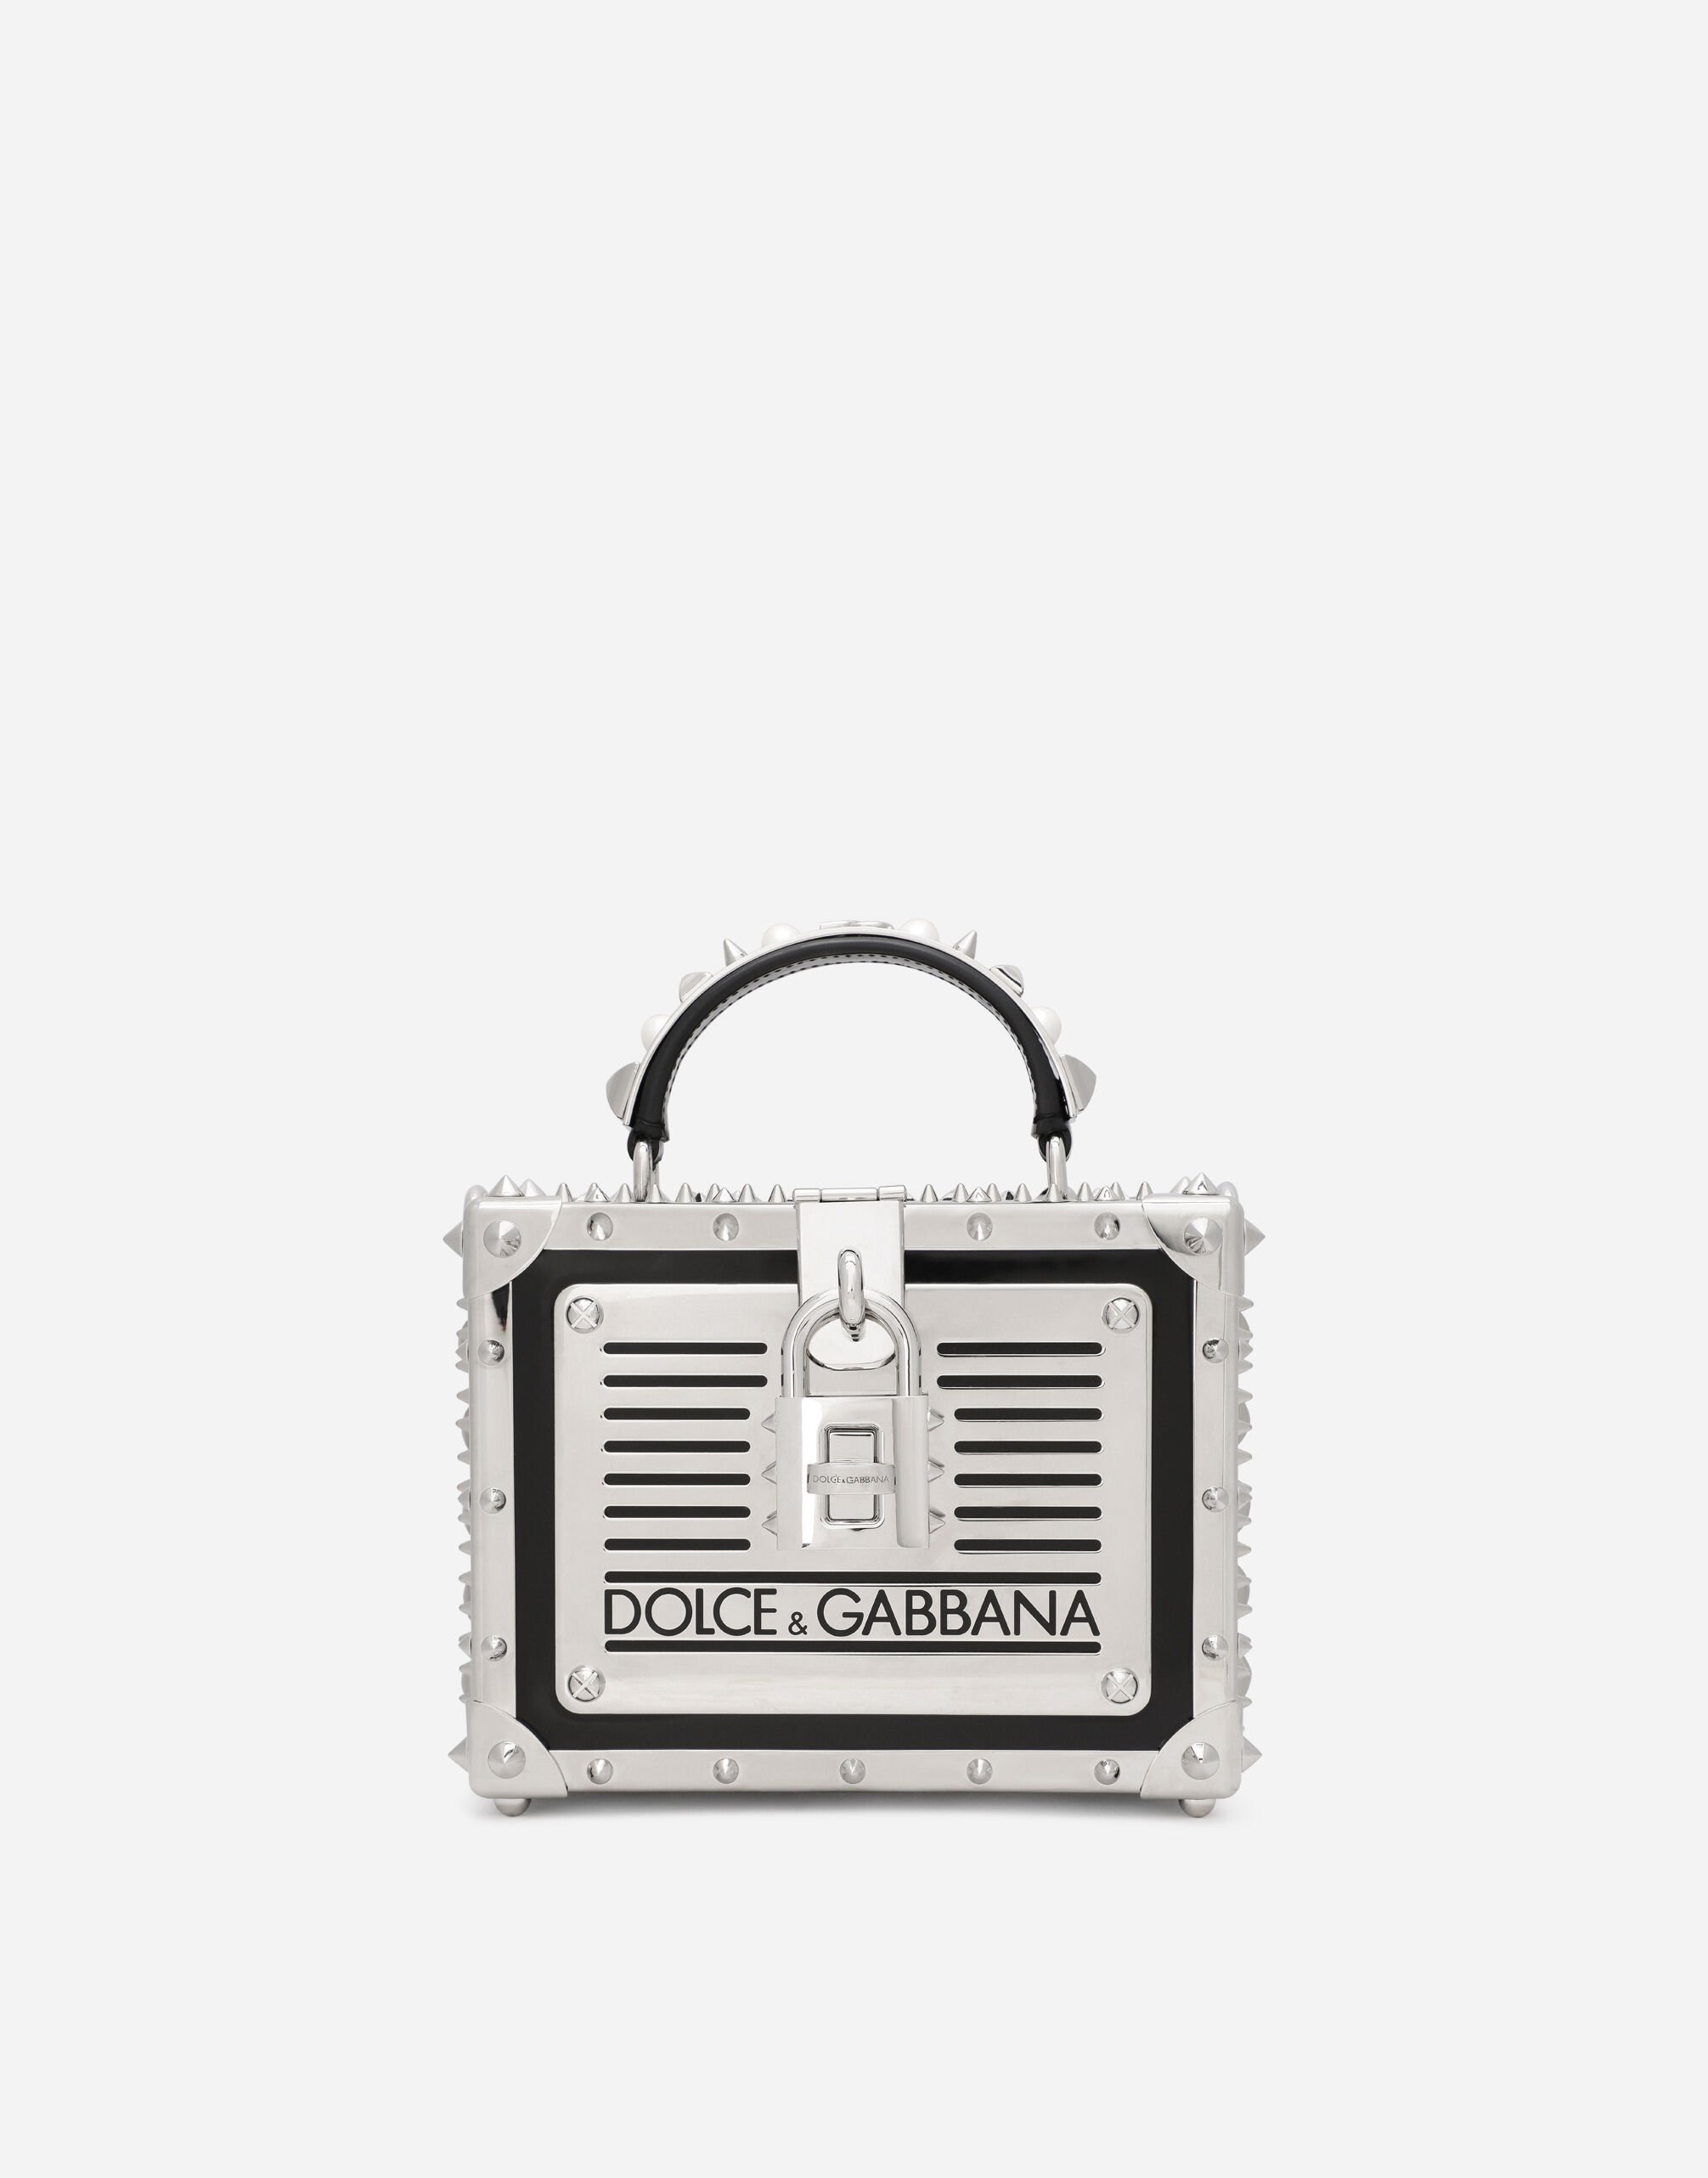 Dolce & Gabbana Polished calfskin Dolce Box bag with studs Multicolor BB7165AY586